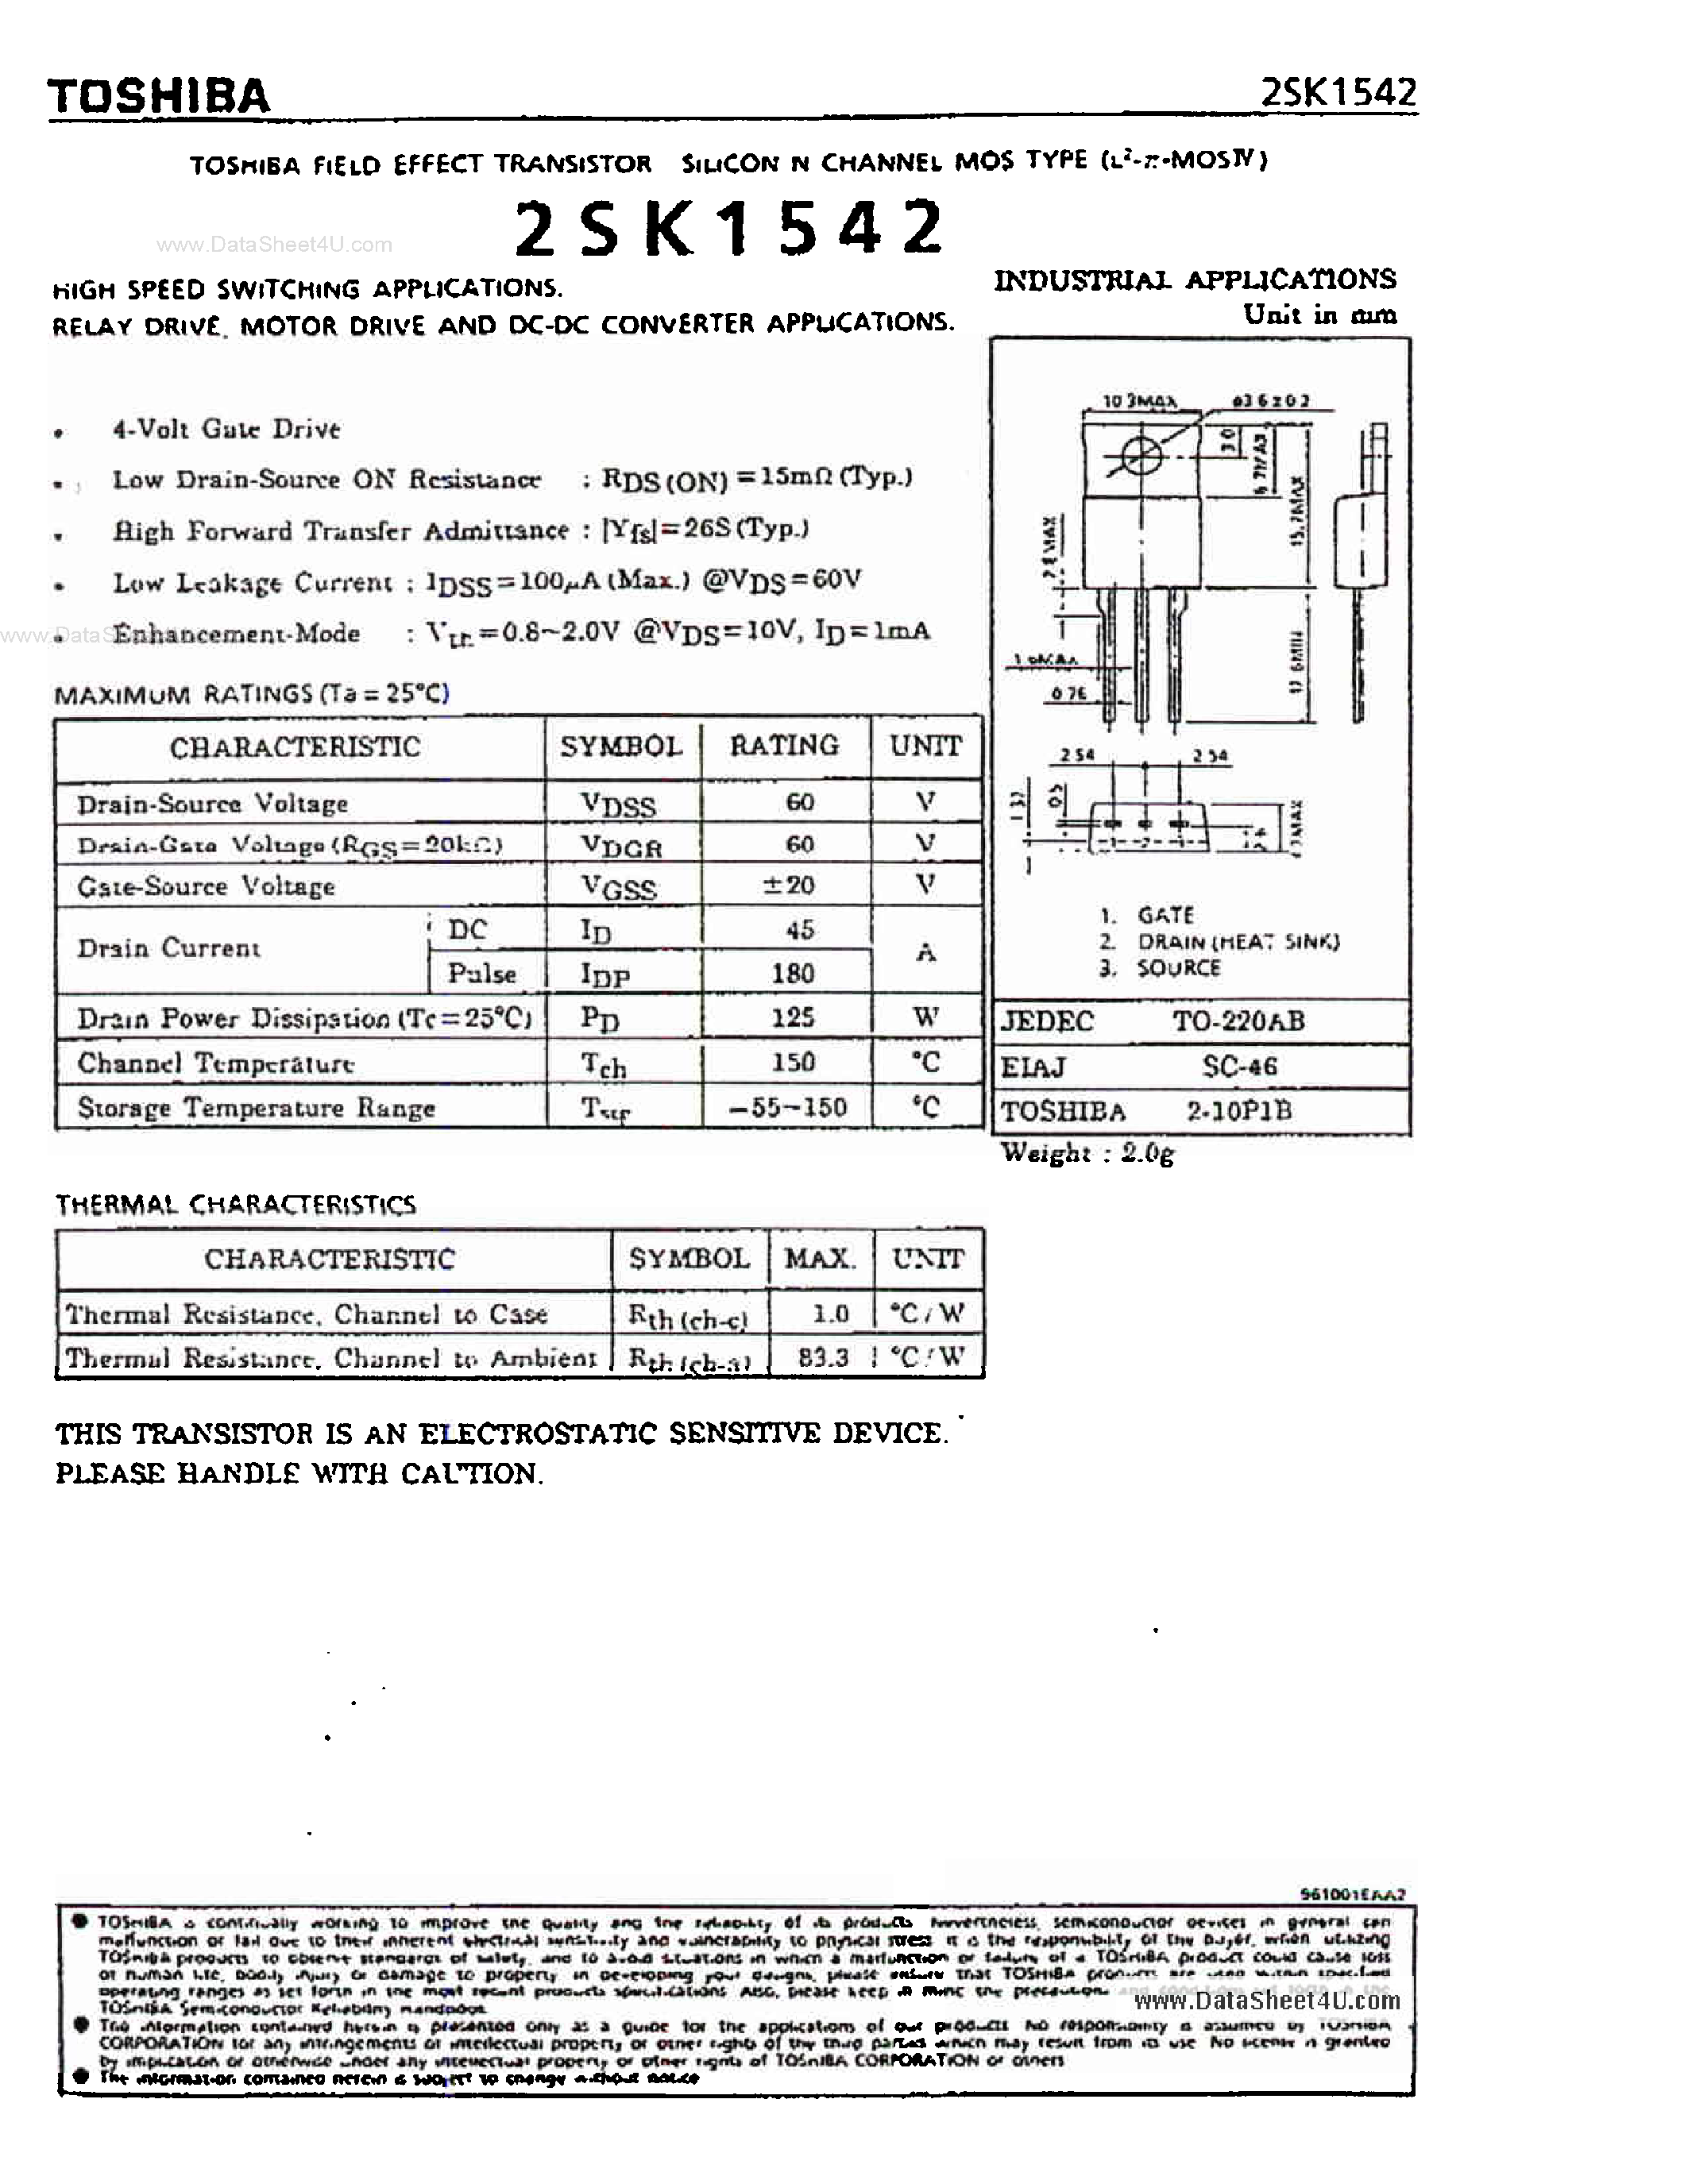 Datasheet K1542 - Search -----> 2SK1542 page 1